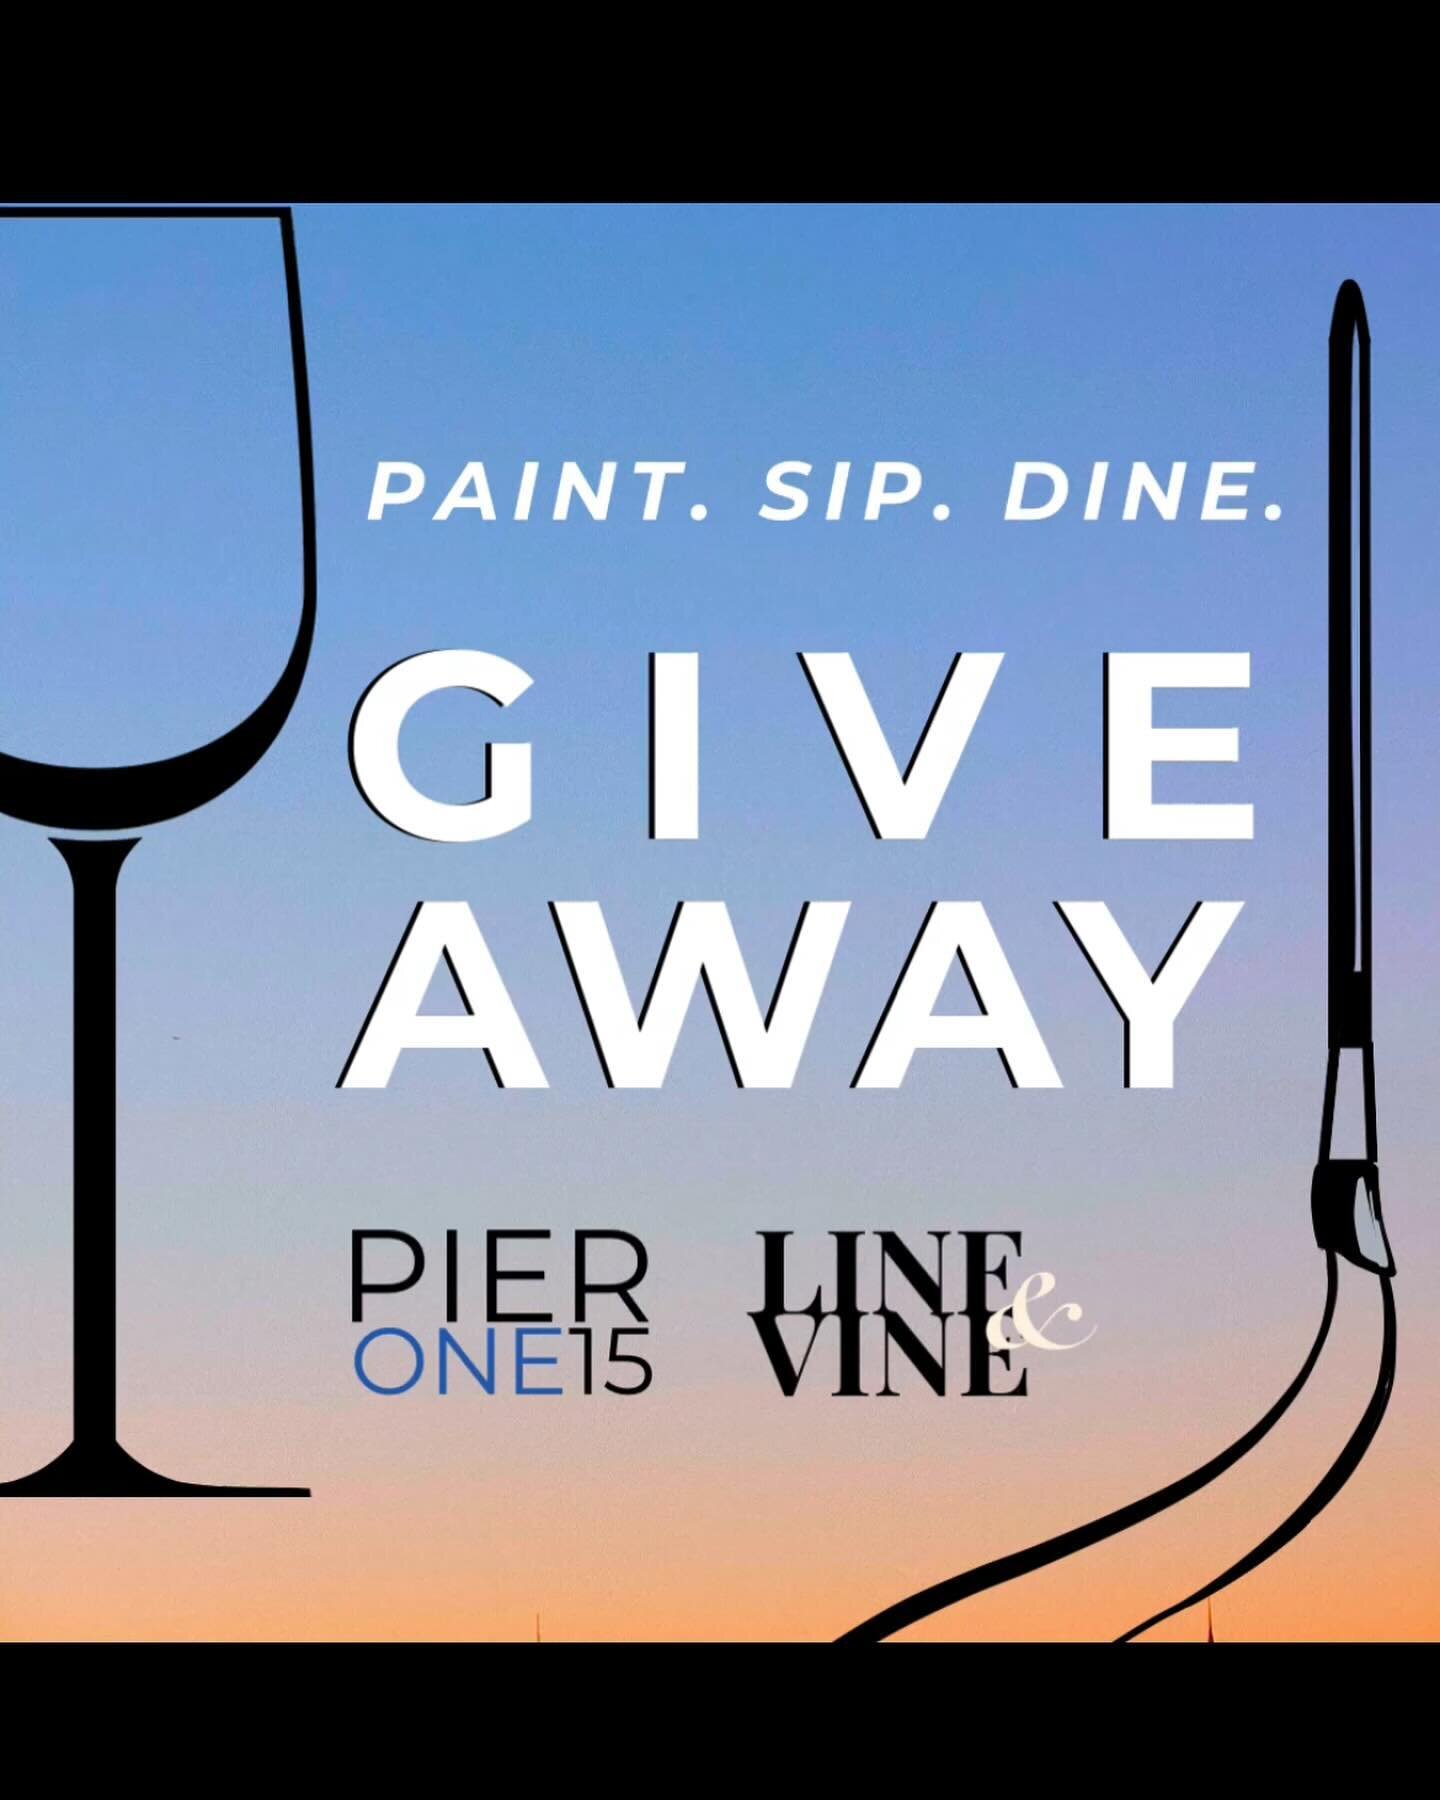 ENJOY STUNNING SKYLINE VIEWS, A POP-UP ART SHOW,
UNLIMITED RED &amp; WHITE WINE, &amp; BOTTOMLESS TEA SANDWICHES . ELEVATED PAINT &amp; SIP INSTRUCTED BY @LINEANDVINENJ

Thursday, March 21. Doors open at 6PM. Event starts 6:30 PM
Get tickets using li